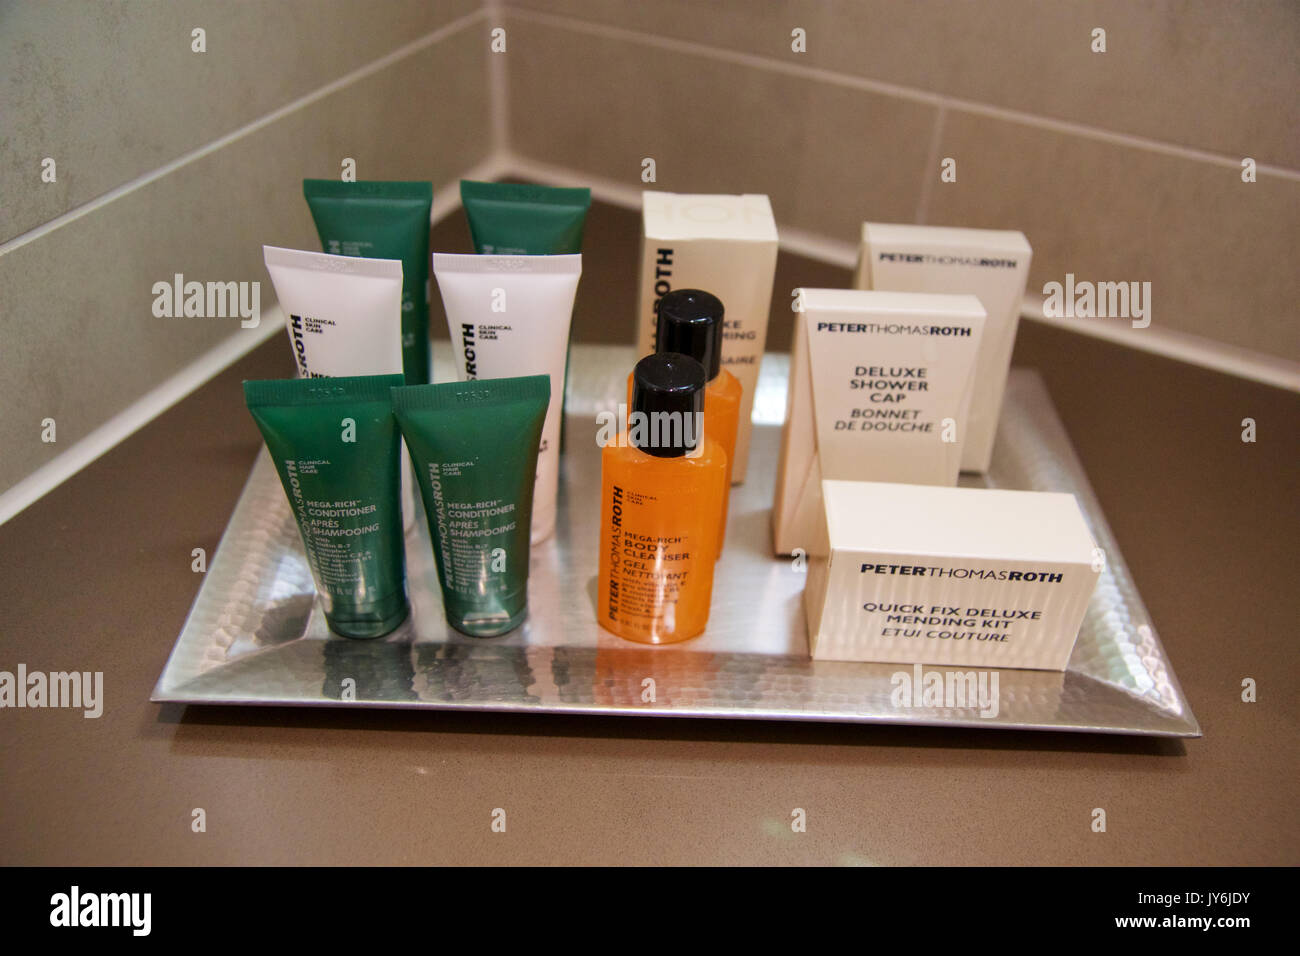 MAINZ, GERMANY - JUL 7th, 2017: Shower amenity set at a luxury hotel, A bar of soap, shampoo and body lotion Stock Photo